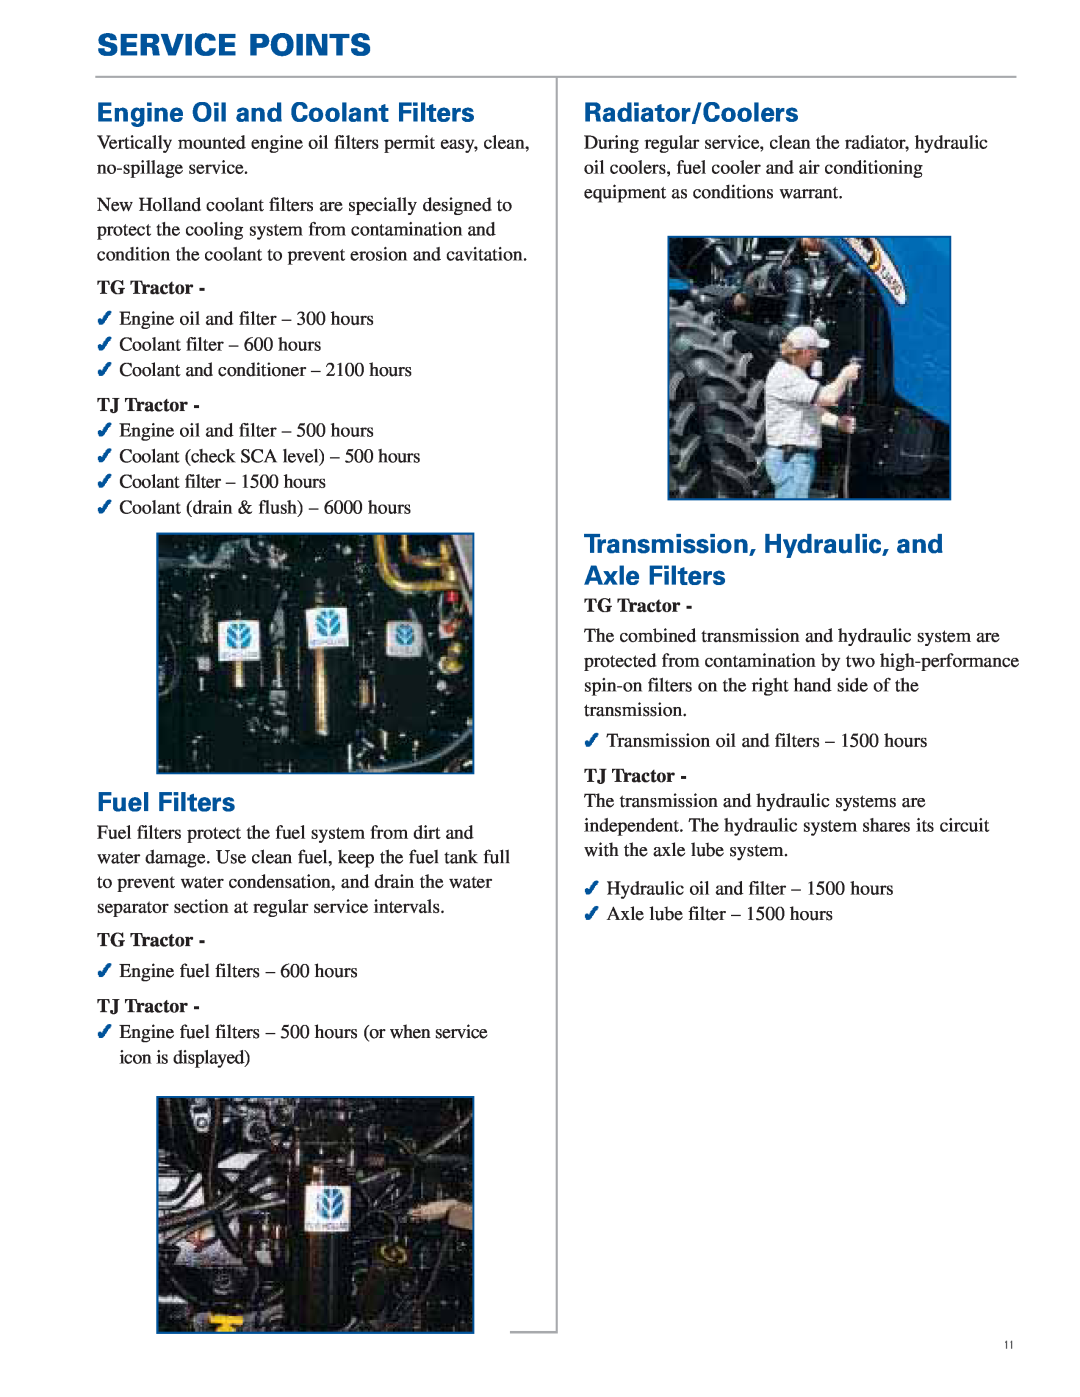 New Holland TG Series manual Service Points, Engine Oil and Coolant Filters, Fuel Filters, Radiator/Coolers, TG Tractor 